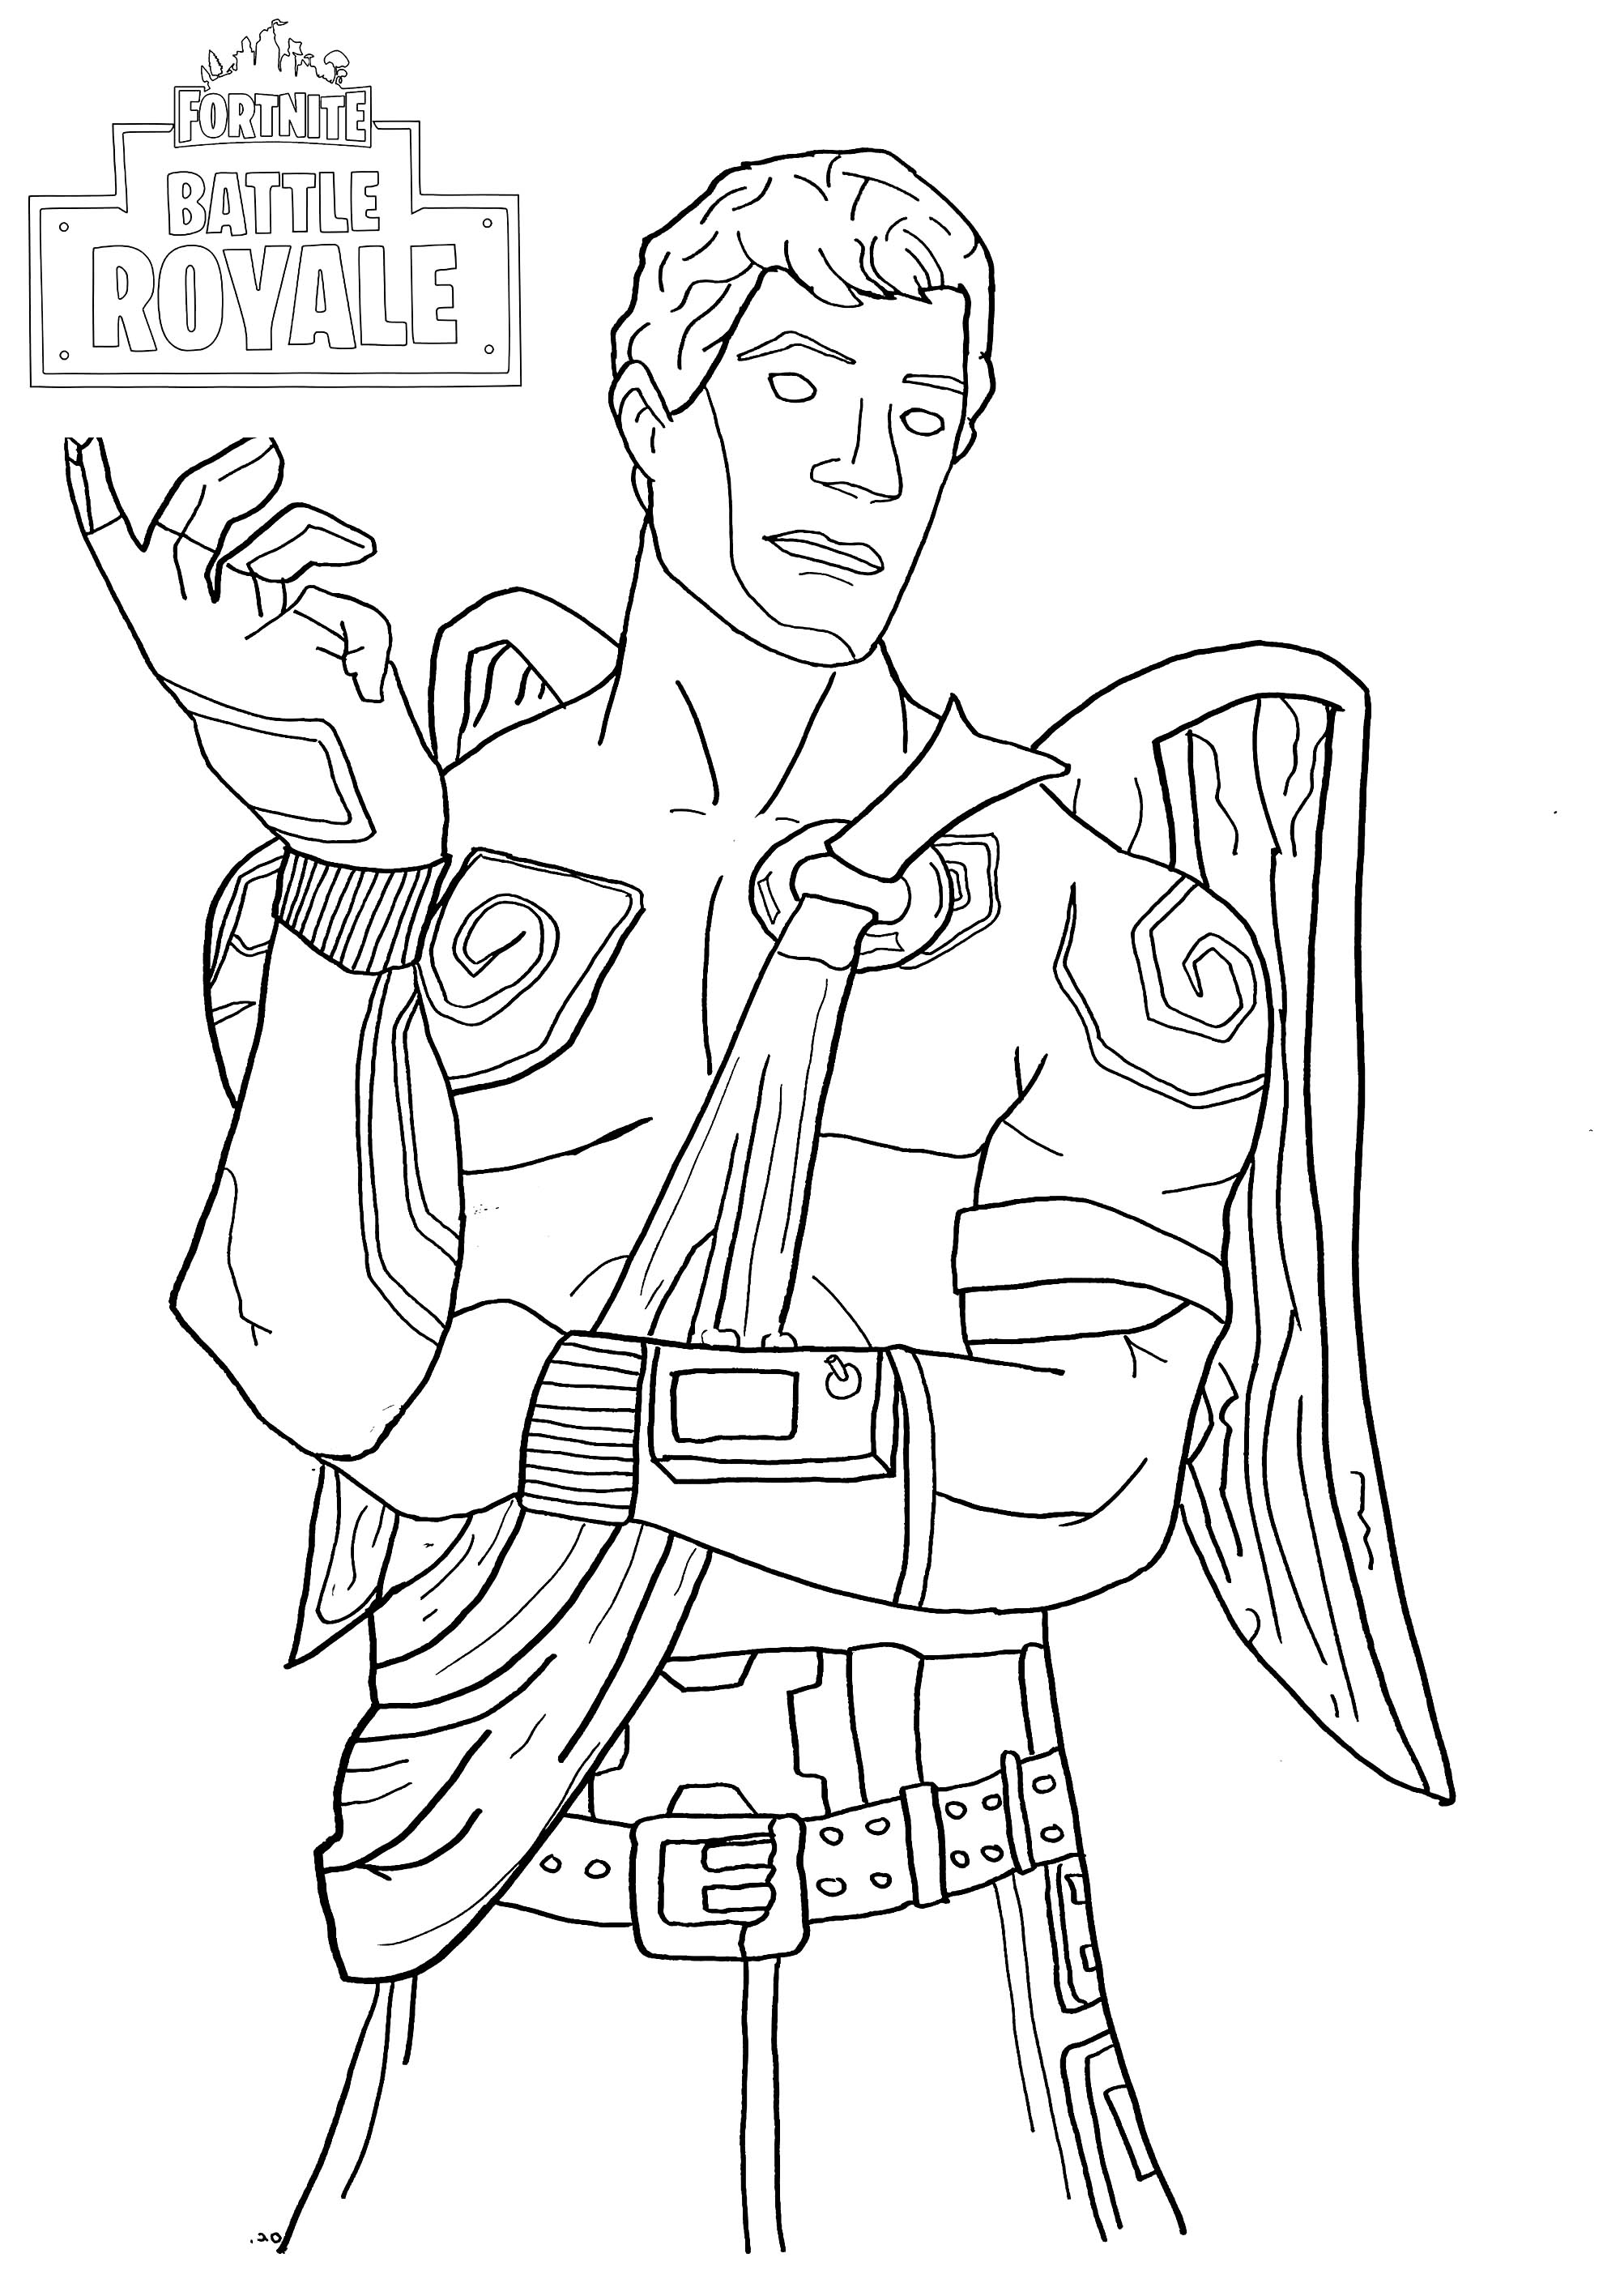 Drawing 17 from Fortnite coloring page to print and coloring